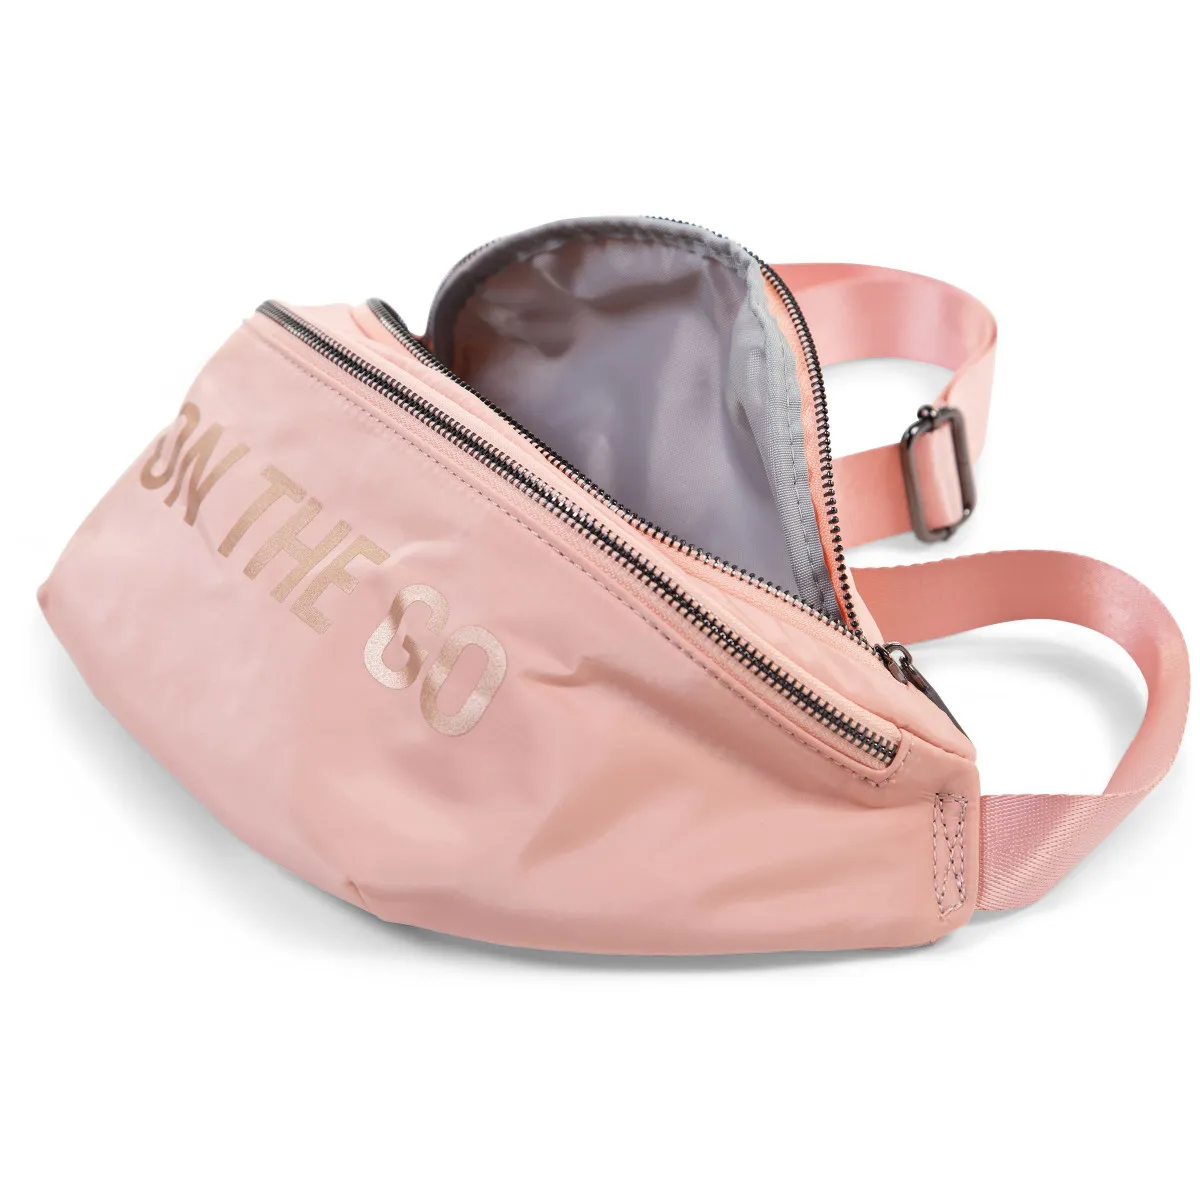 Childhome Banana bag on the go, Pink Copper